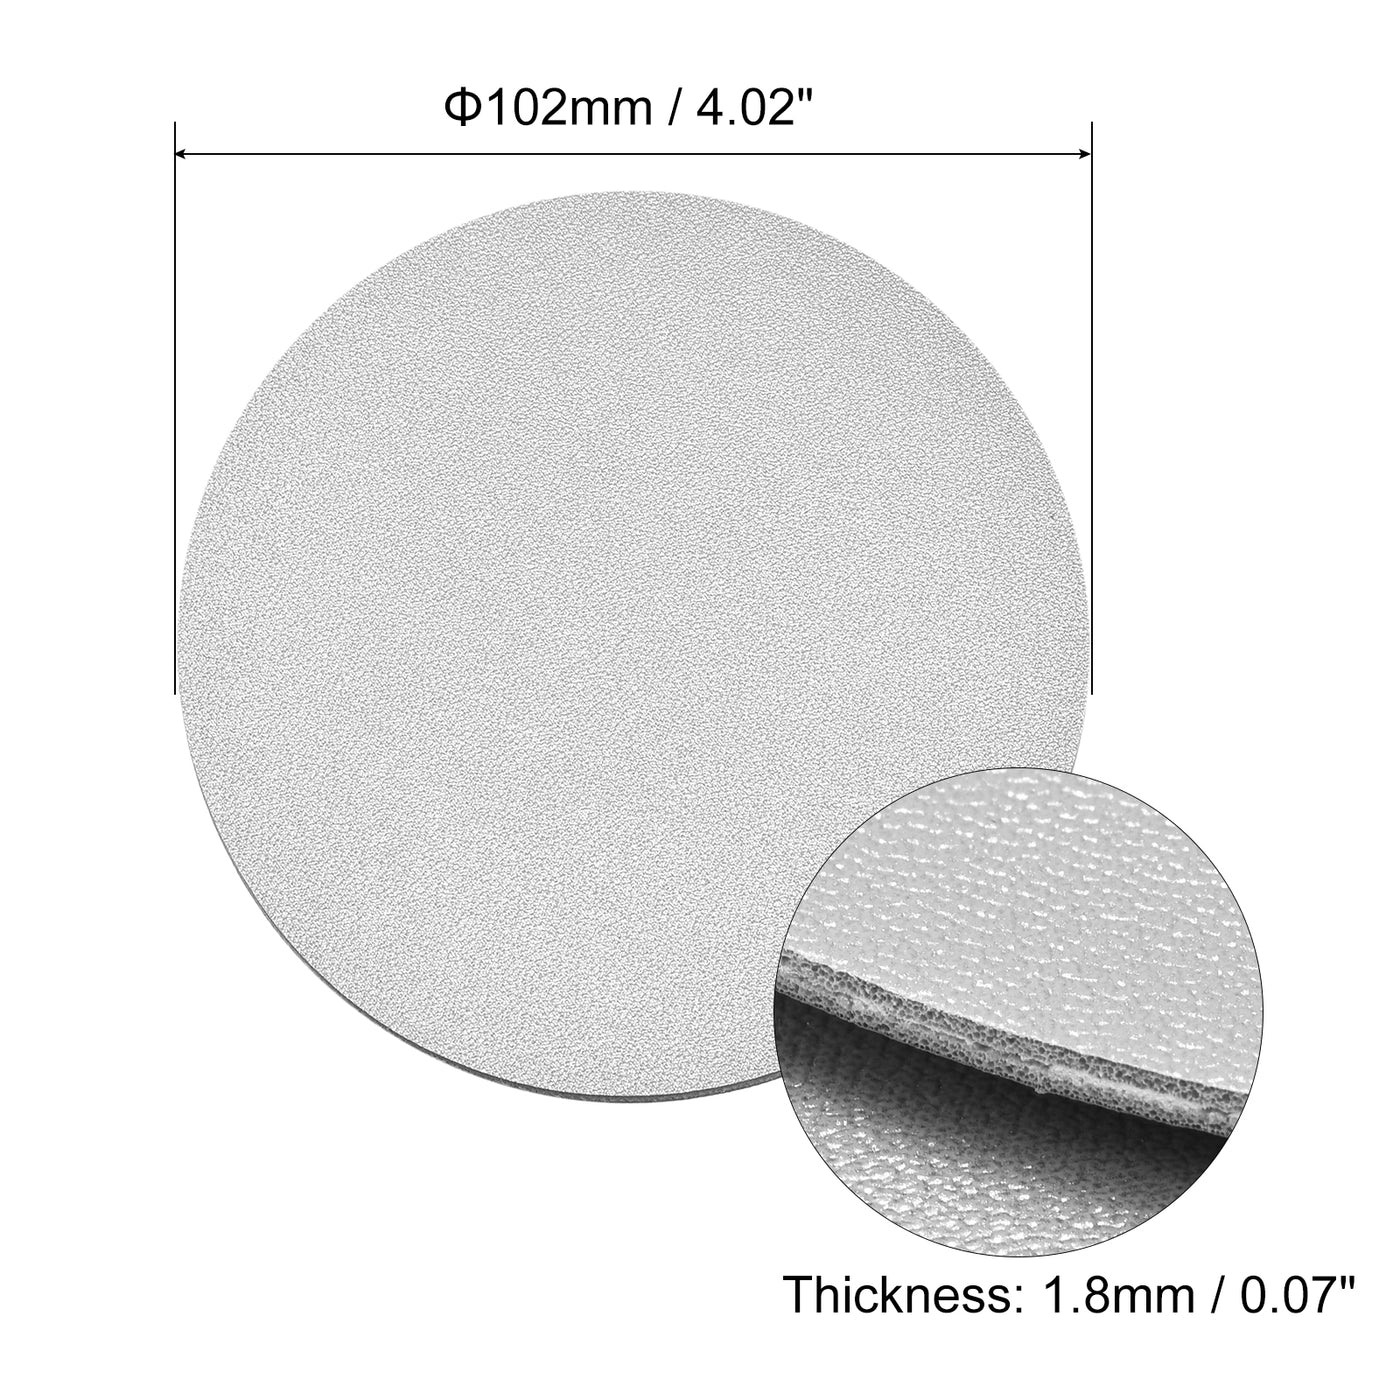 uxcell Uxcell 102mm(4.02") Round Coasters PU Cup Mat Pad for Tableware Silver Tone 2pcs